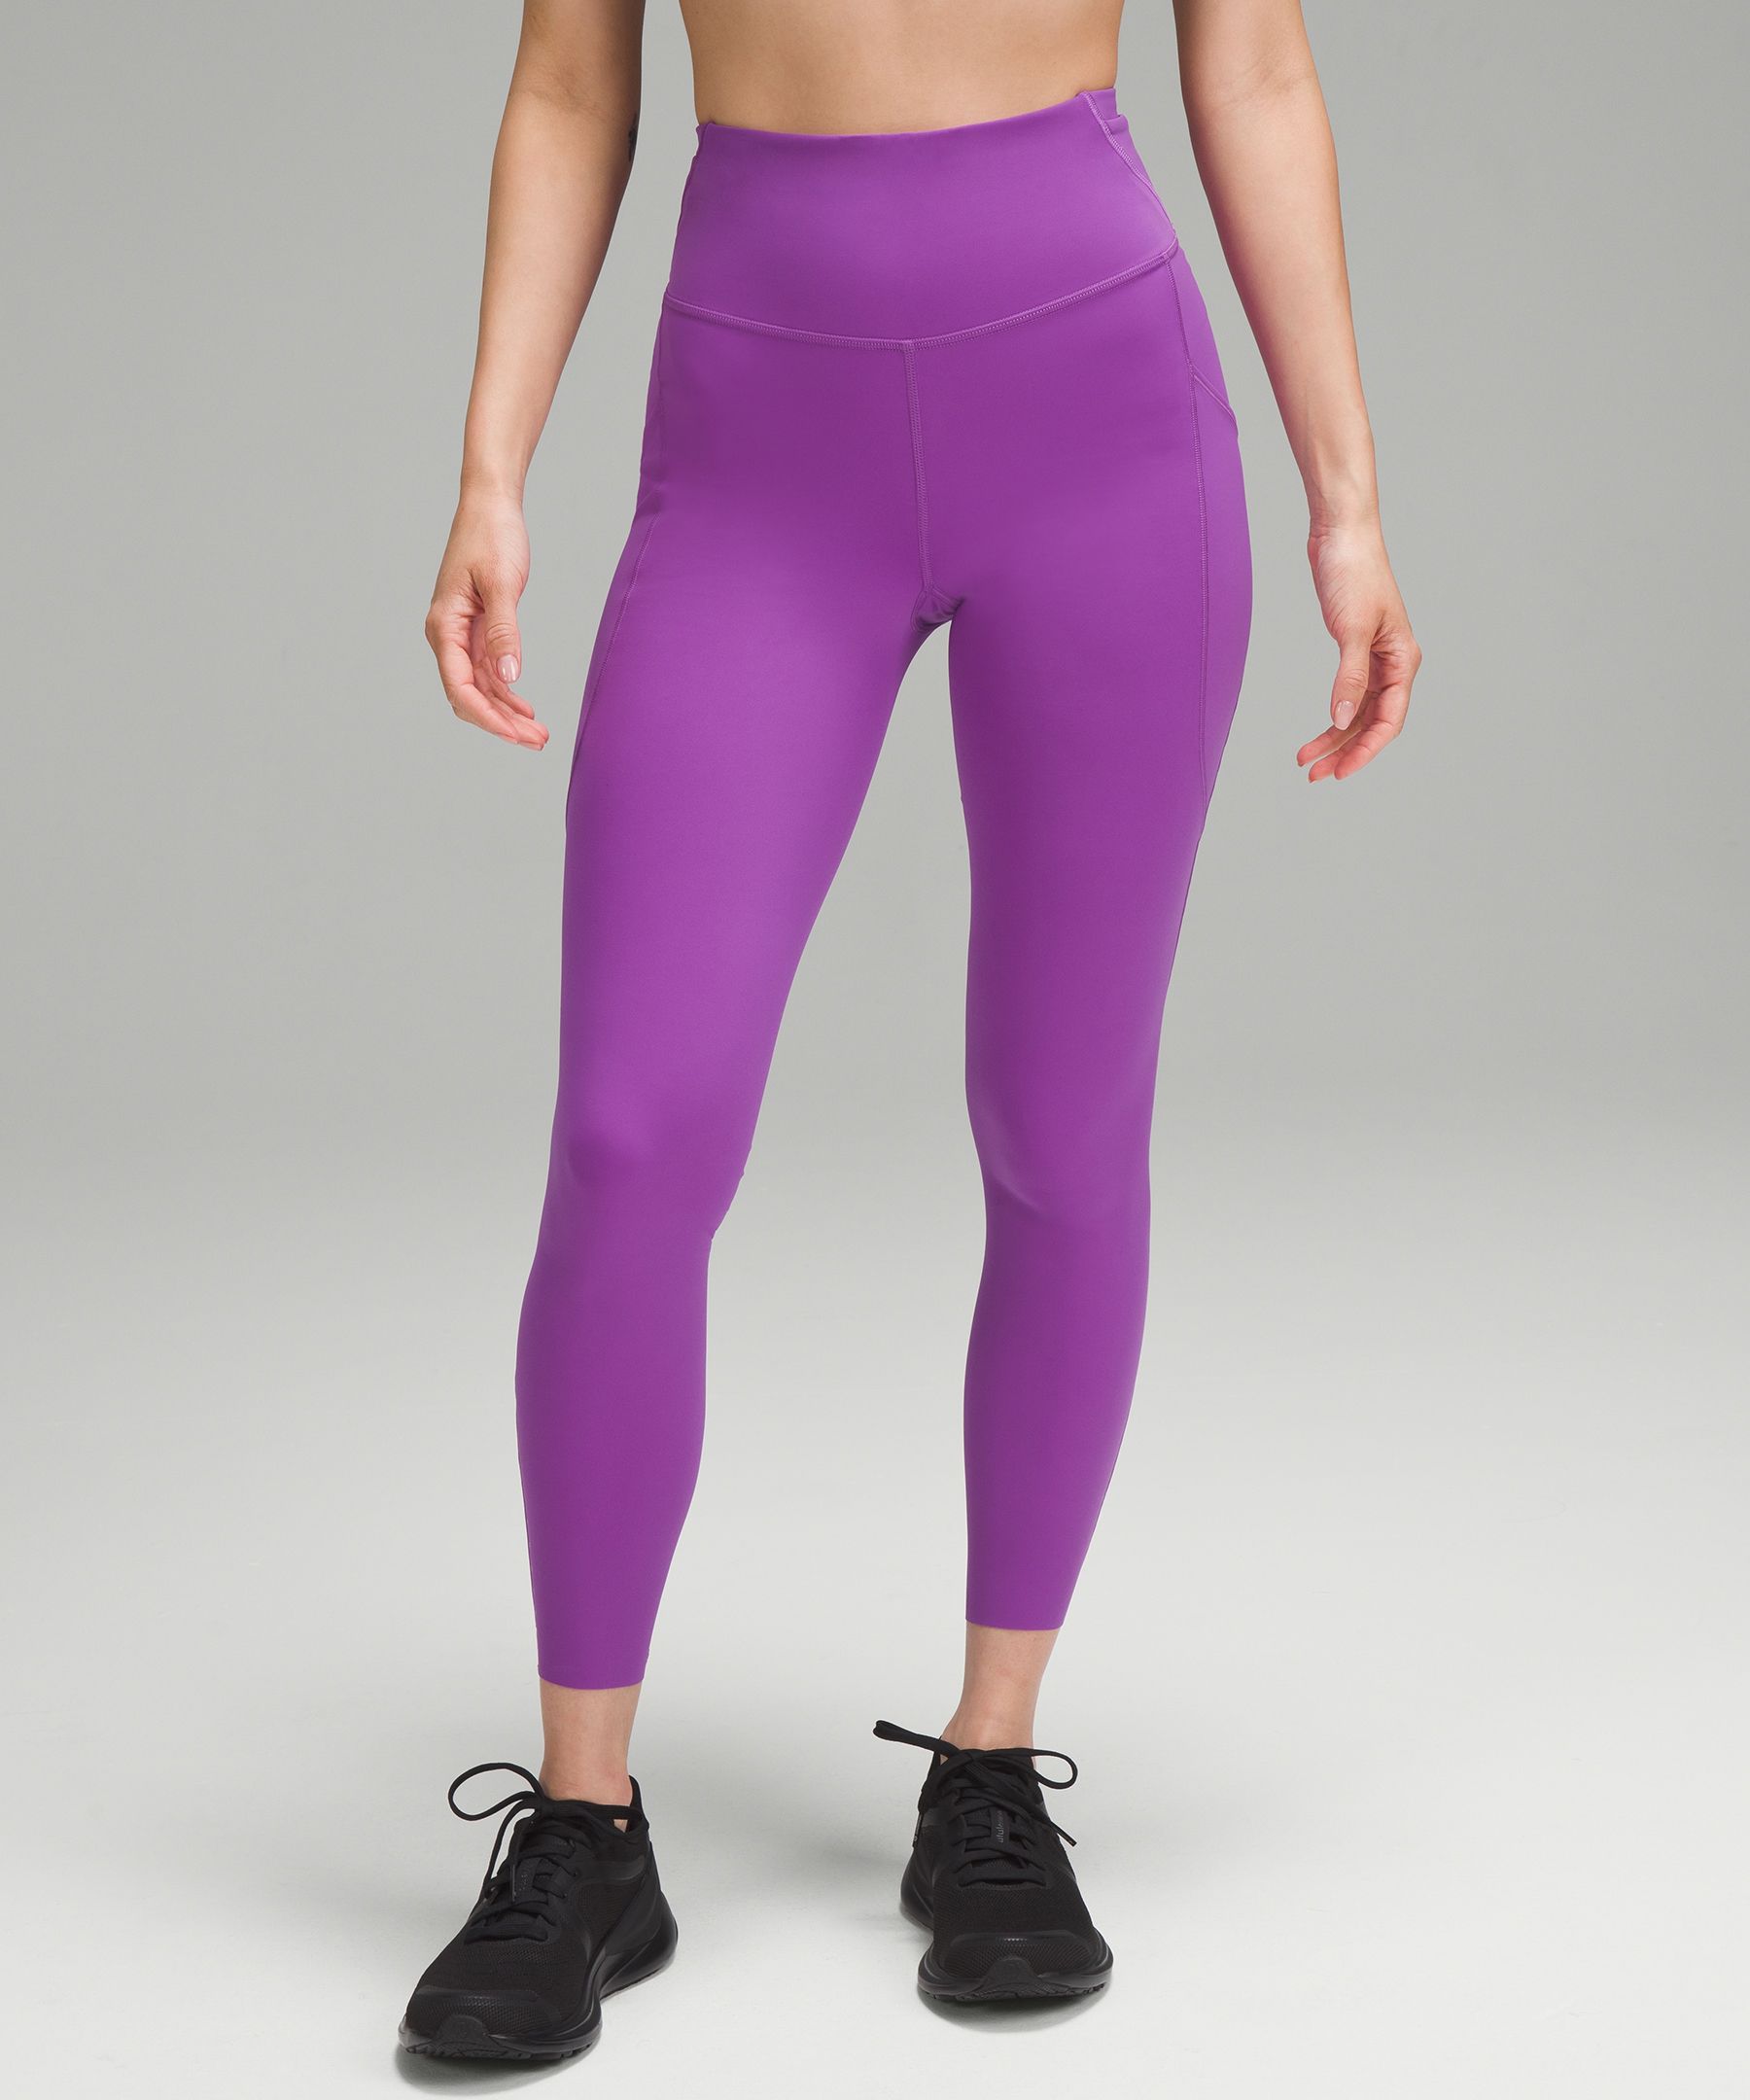 NEW LULULEMON Fast Free 25 Tight 10 12 Violet Red